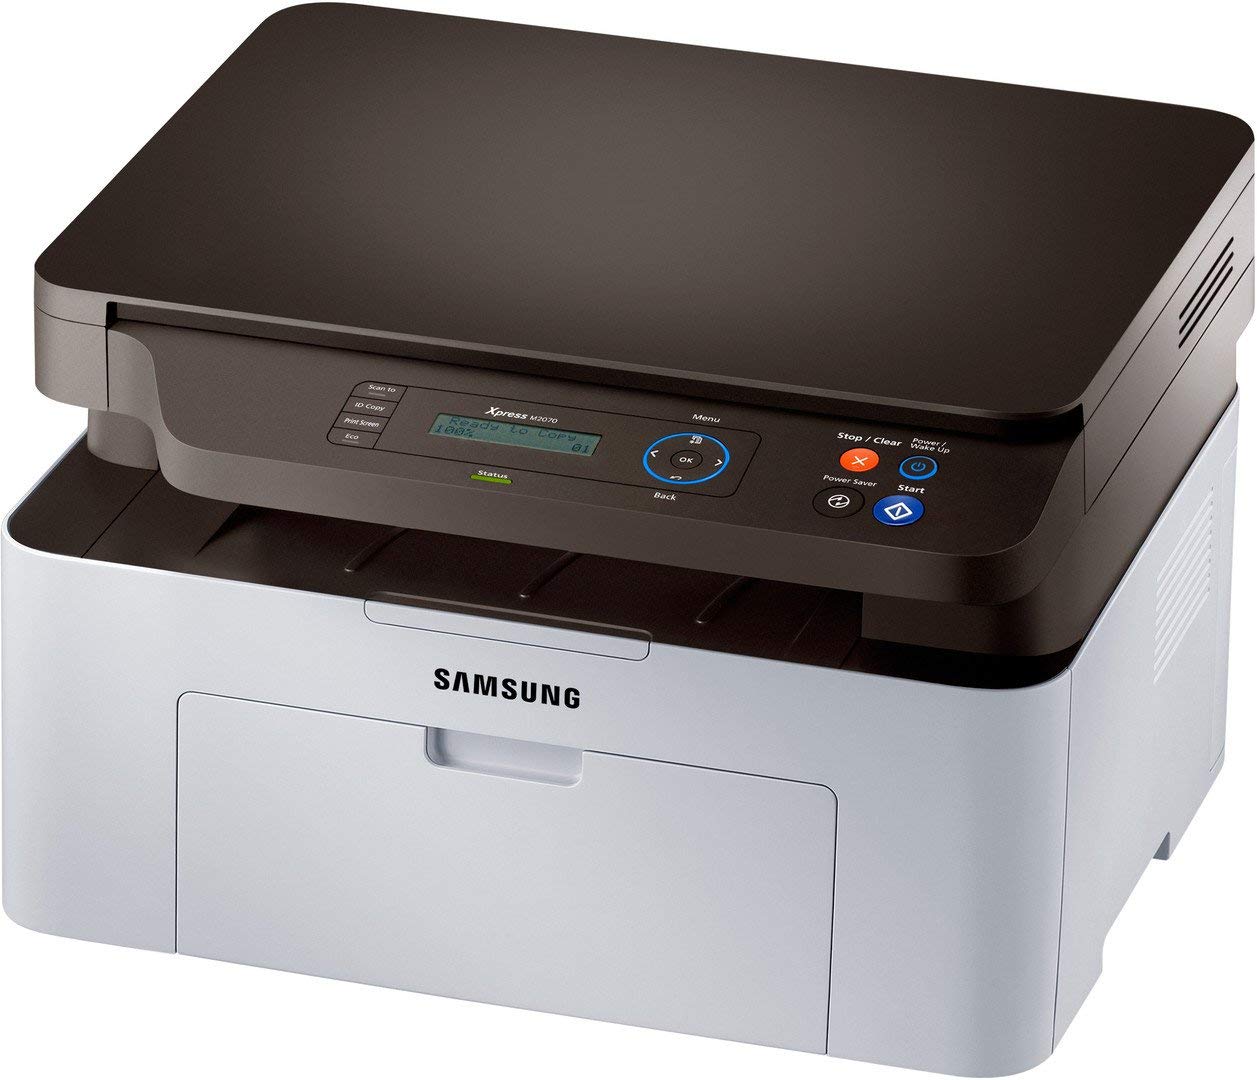 Step-by-step Driver Samsung Laser M2070/M2071 MX Installation - Featured